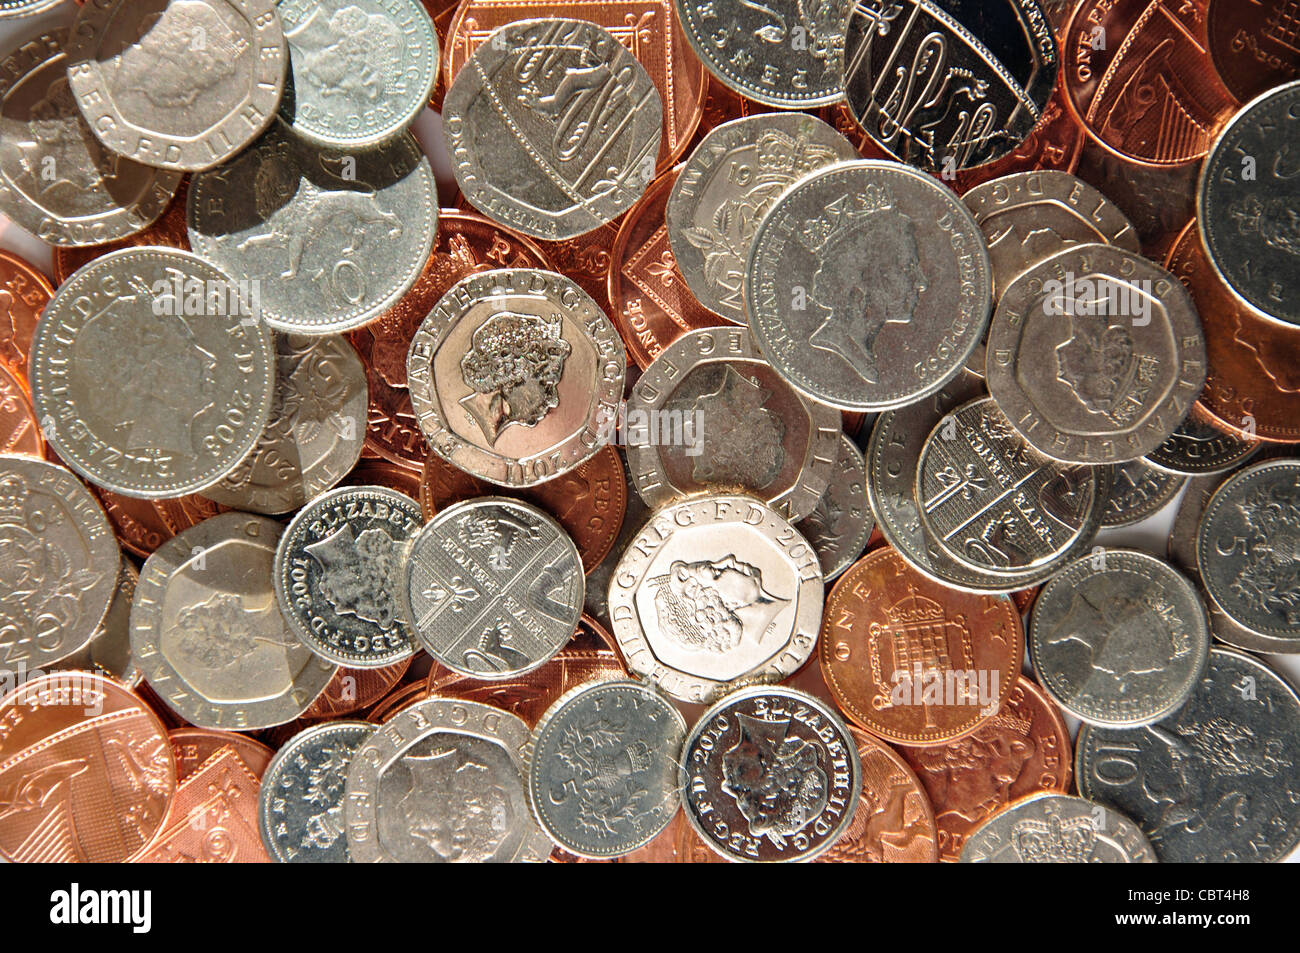 Collection of British coins, Greater London, England, United Kingdom Stock Photo